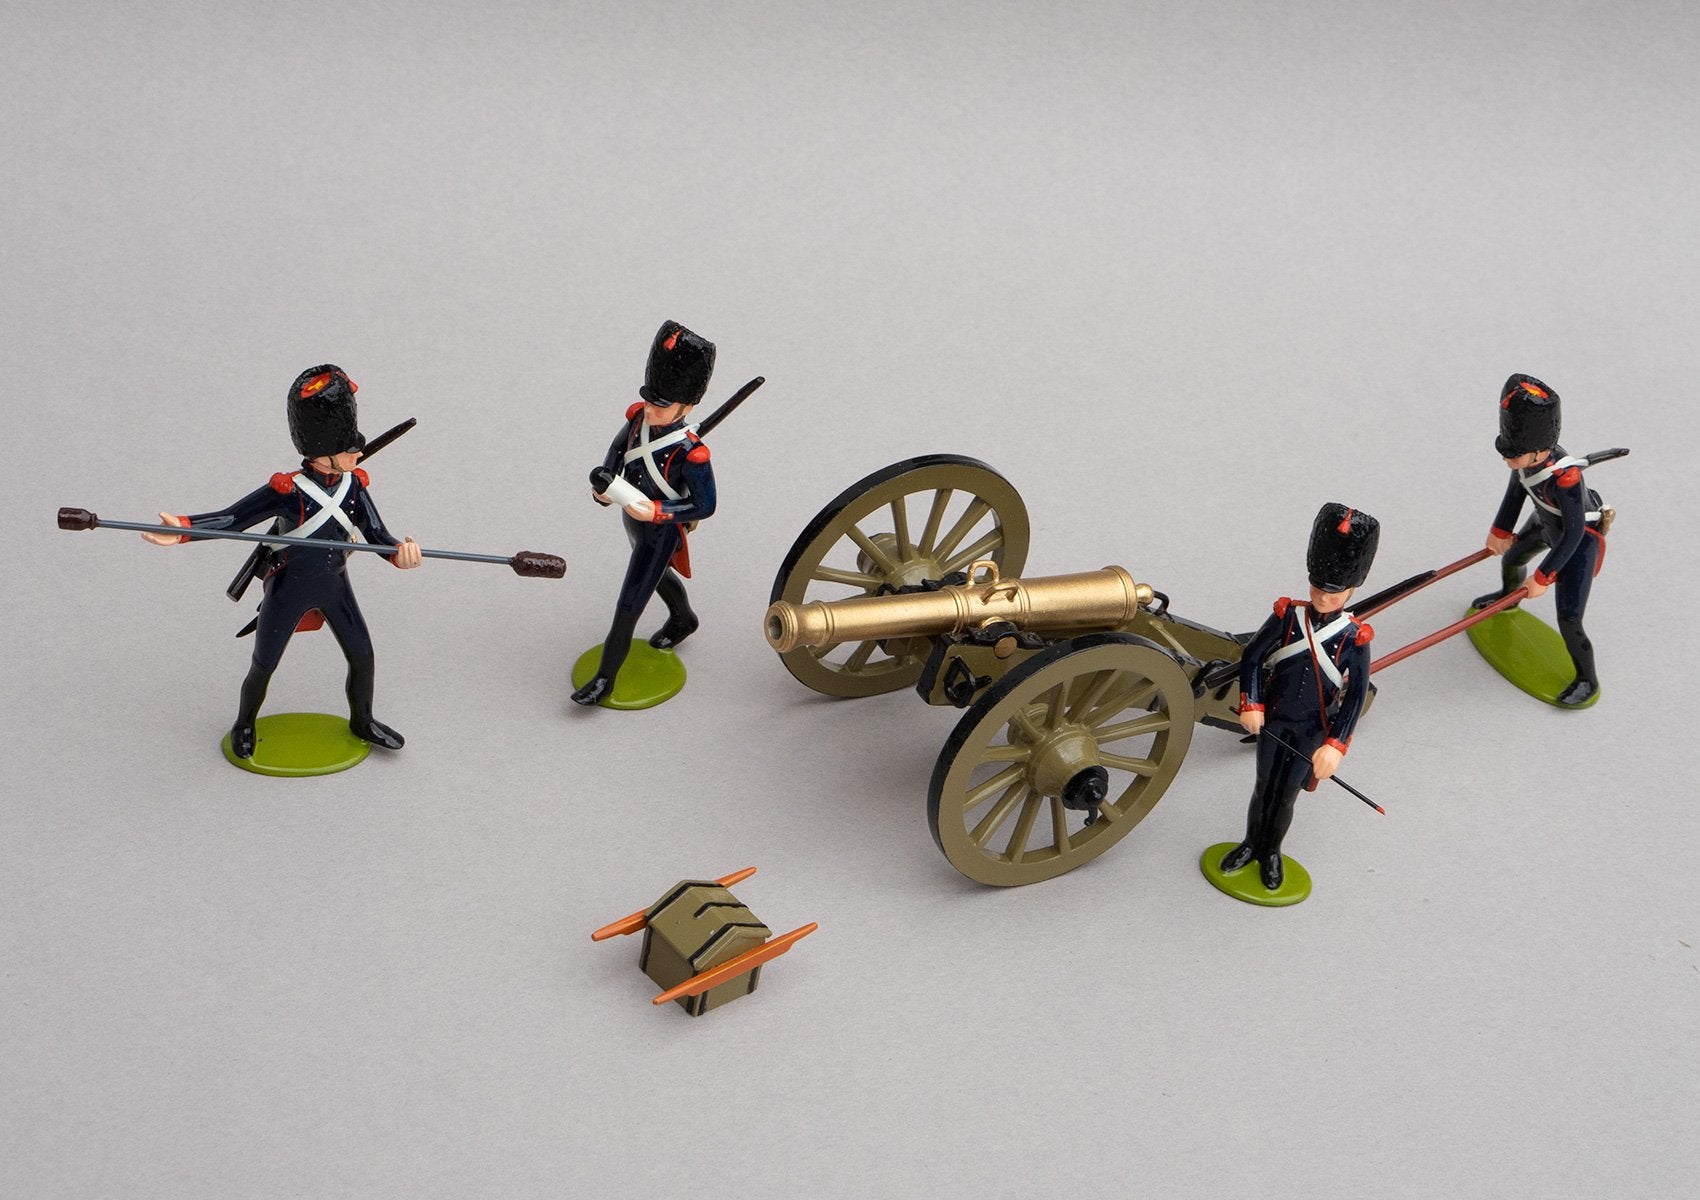 Set 130 Foot Artillery of the Guard | French | Napoleonic Wars | Gun crew of the Imperial Guard 12 pounder gun of the Gribeauval system. Set comprises a gun, and four gunners, and ammunition box. They wear their campaign uniforms with muskets slung across their backs | Waterloo | © Imperial Productions | Sculpt by David Cowe